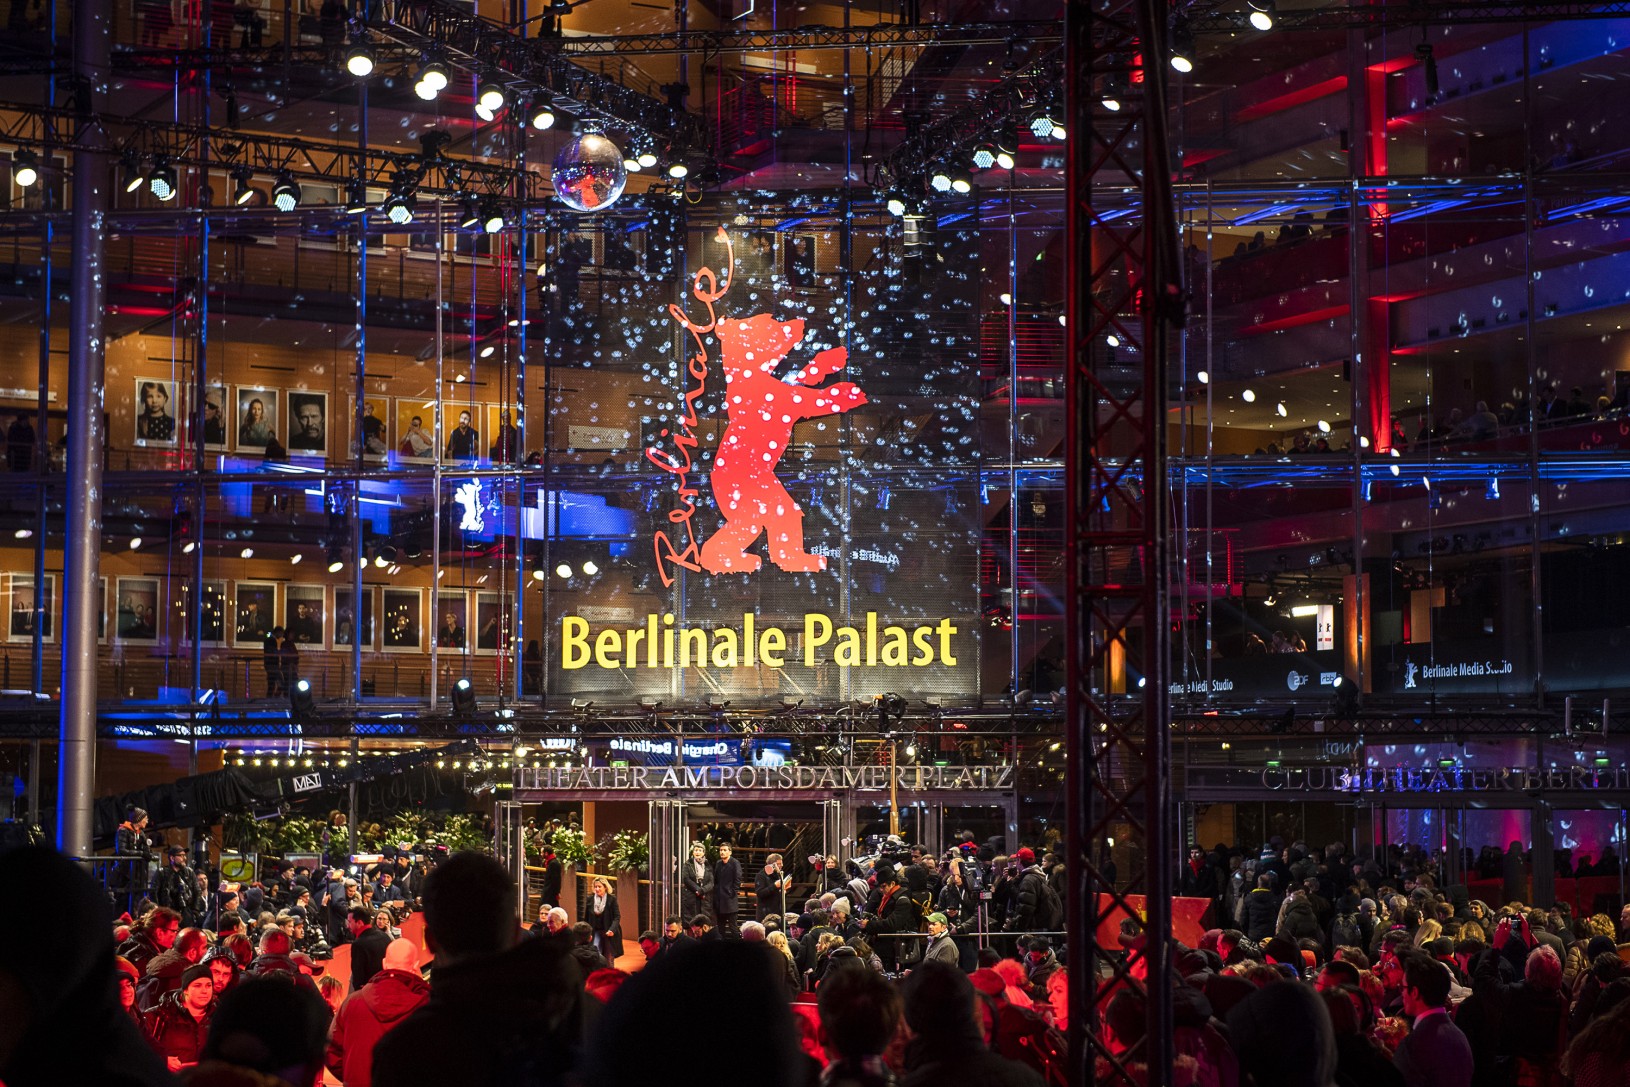  Berlinale Archive News & Topics News & Press Releases Festive